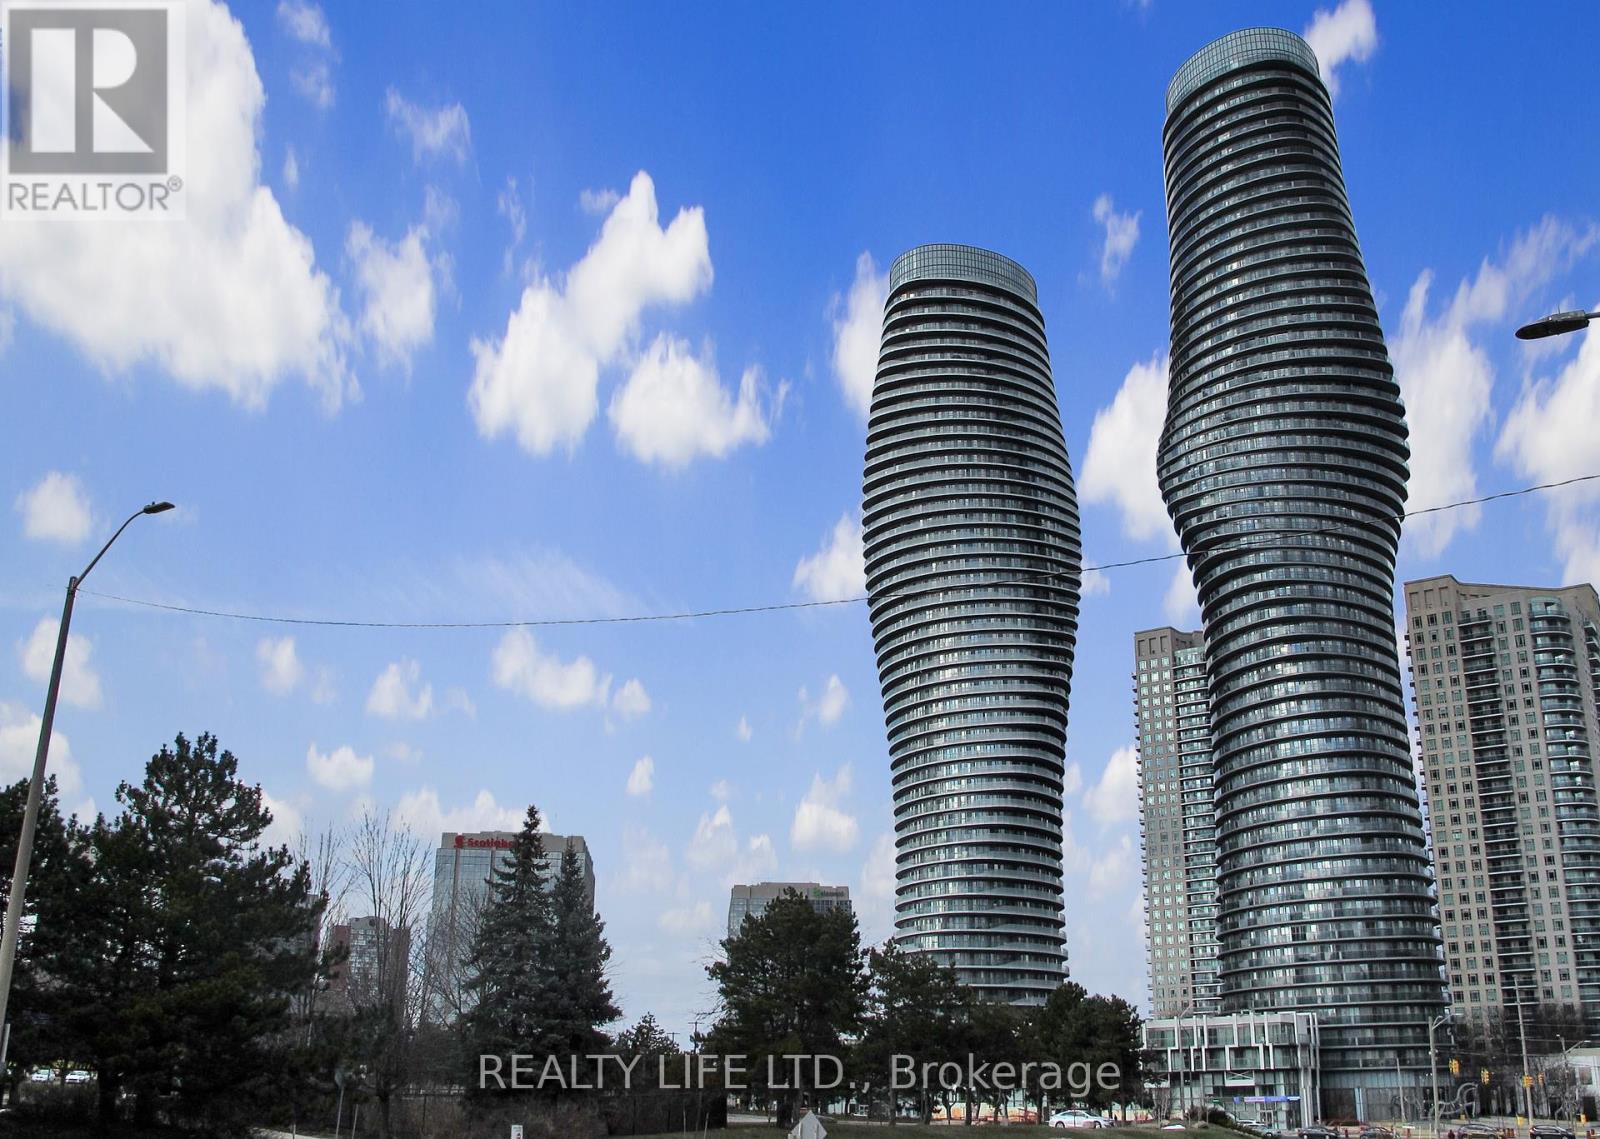 60 Absolute, Mississauga, 2 Bedrooms Bedrooms, ,1 BathroomBathrooms,Single Family,For Sale,Absolute,W8196574